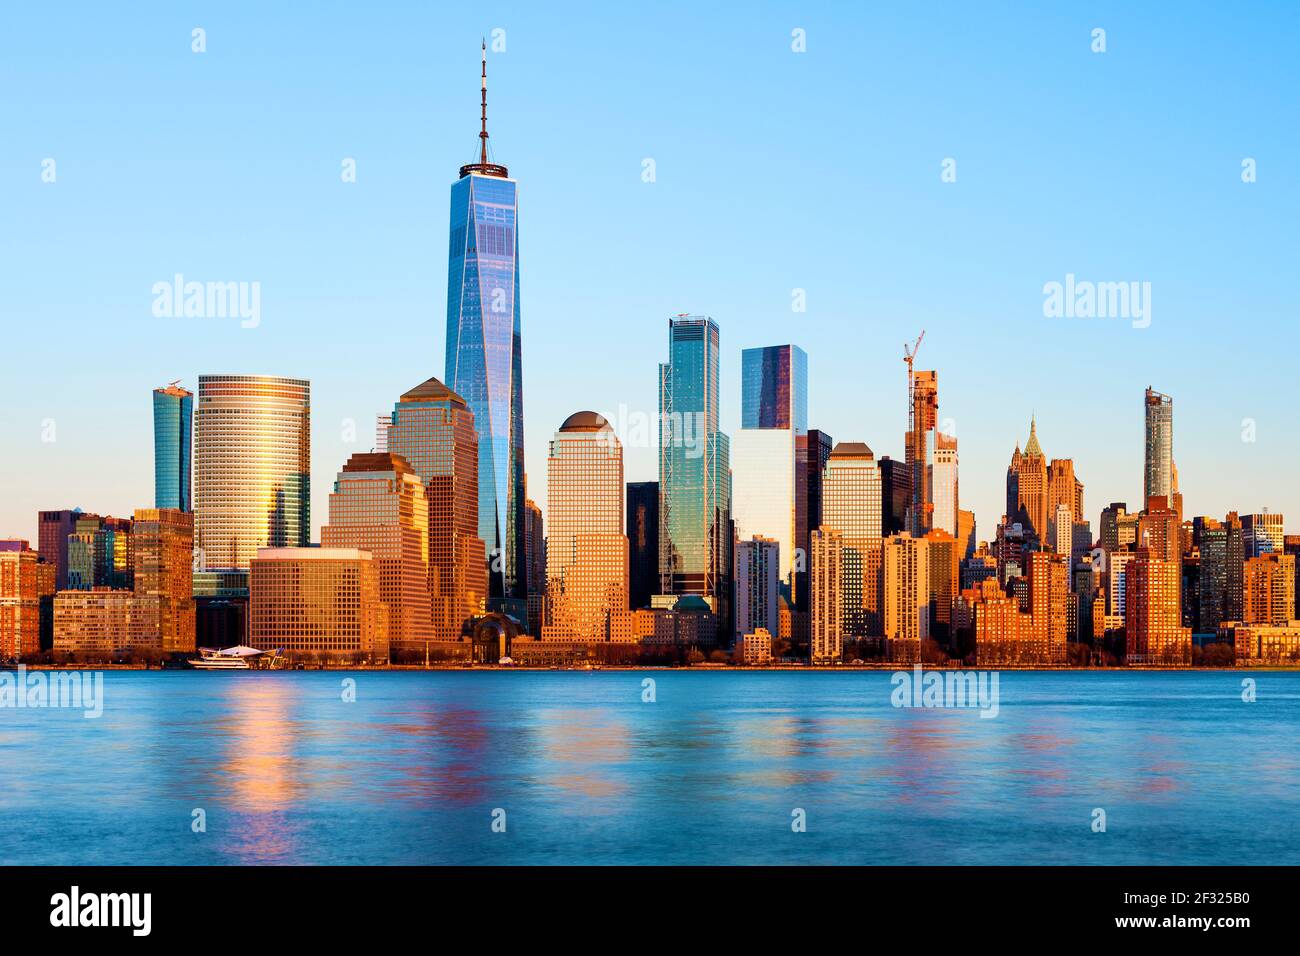 New York Skyline, Lower Manhattan with Freedom Tower and World Financial Center, Hudson River, New York City. Stock Photo